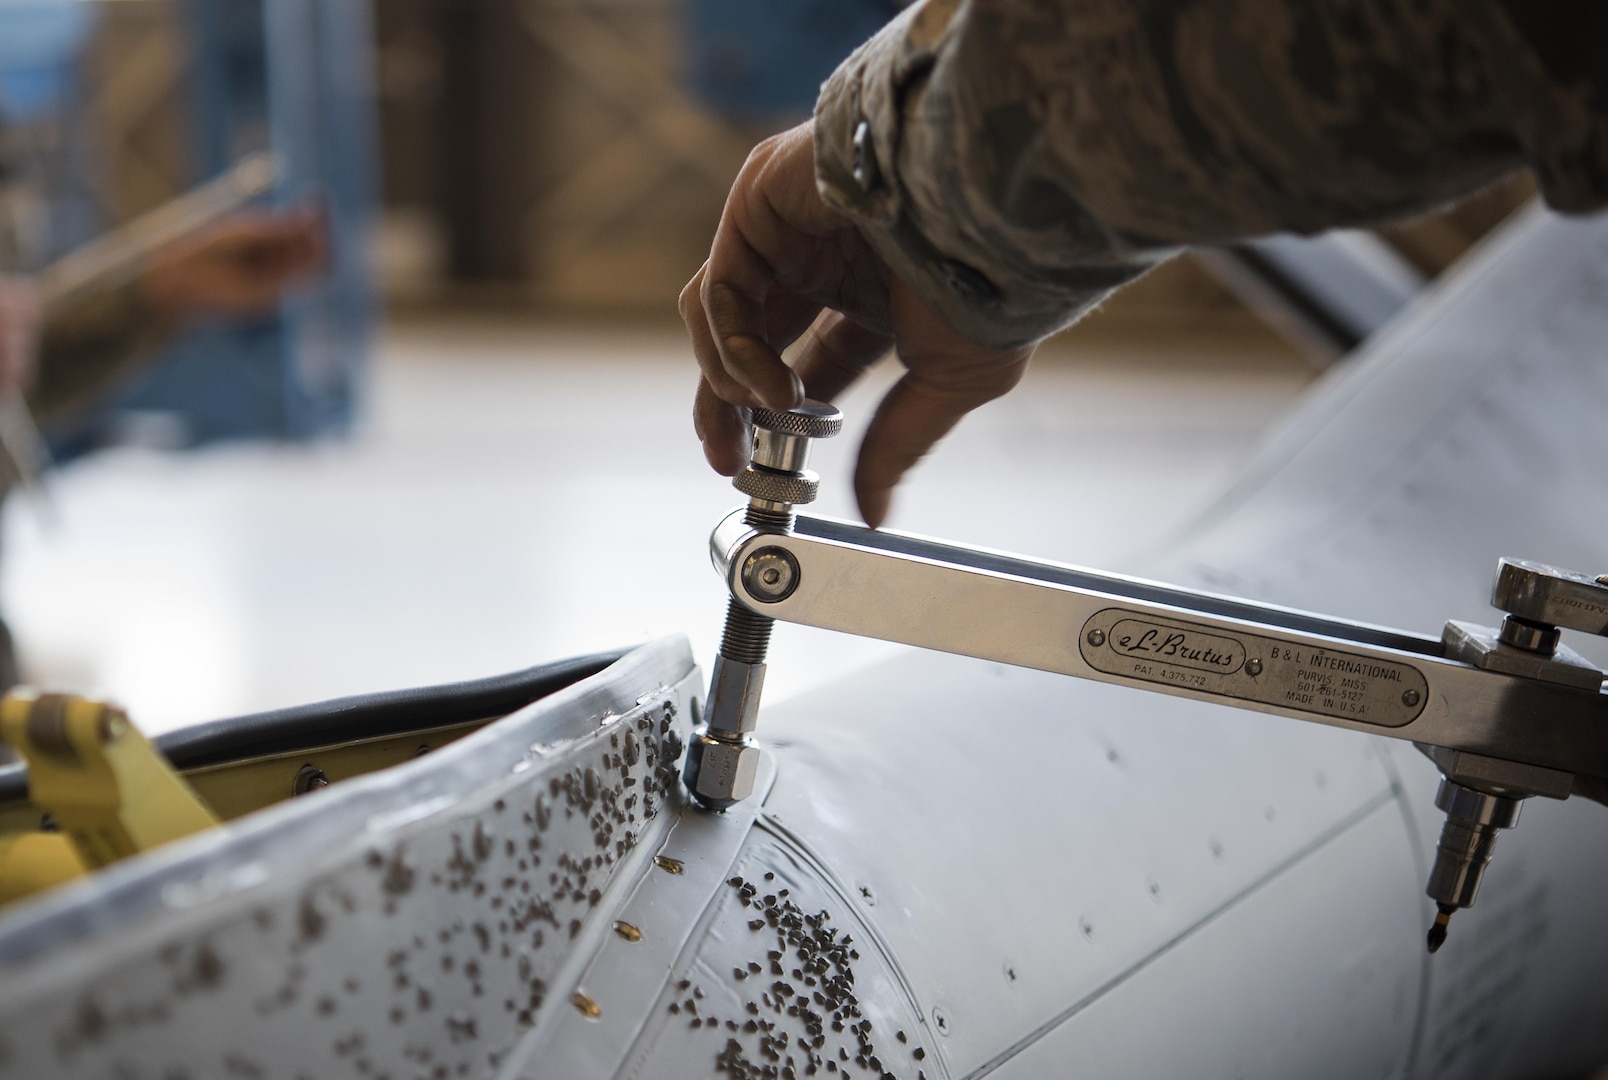 Tech. Sgt. Alfonso Vigil 92nd Maintenance Squadron hydraulics NCO in charge of dayshift, removes a stripped screw from the saddle panel located on the refueling boom Dec. 16, 2016, at Fairchild Air Force Base, Wash. The boom operator uses the ruddervators to guide the boom to another jet during air refueling operations. (U.S. Air Force photo/ Airman 1st Class Sean Campbell)